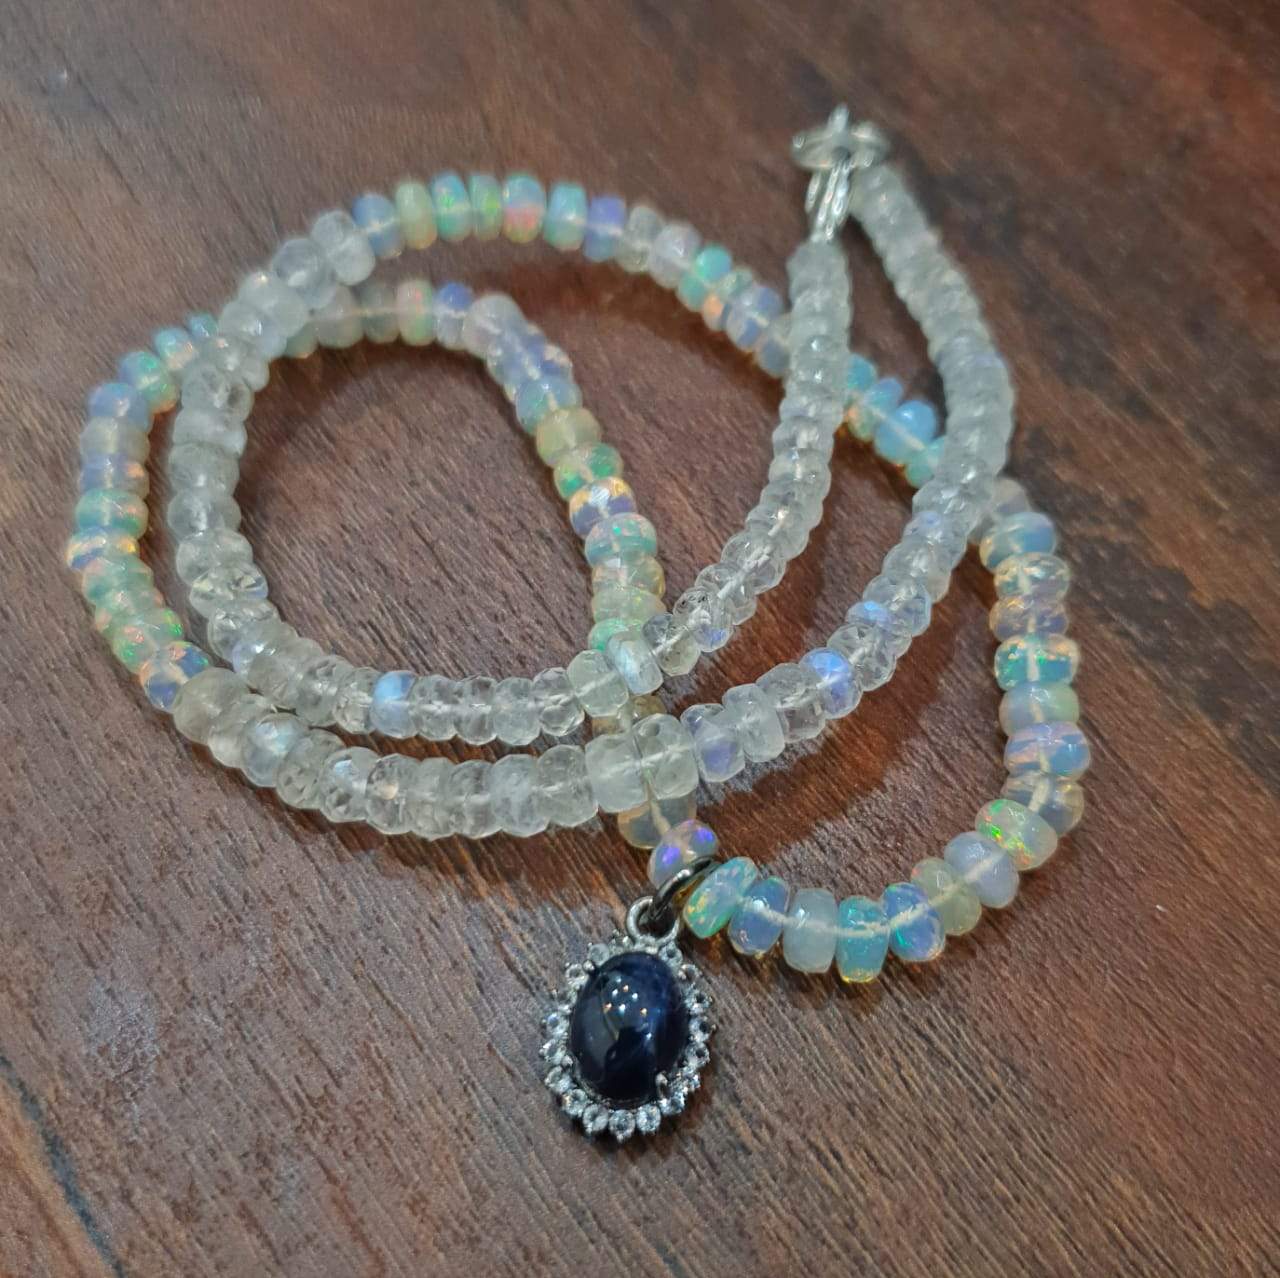 Star Sapphire with Opal And Moonstone Beads Necklace | Jewelry - The LabradoriteKing